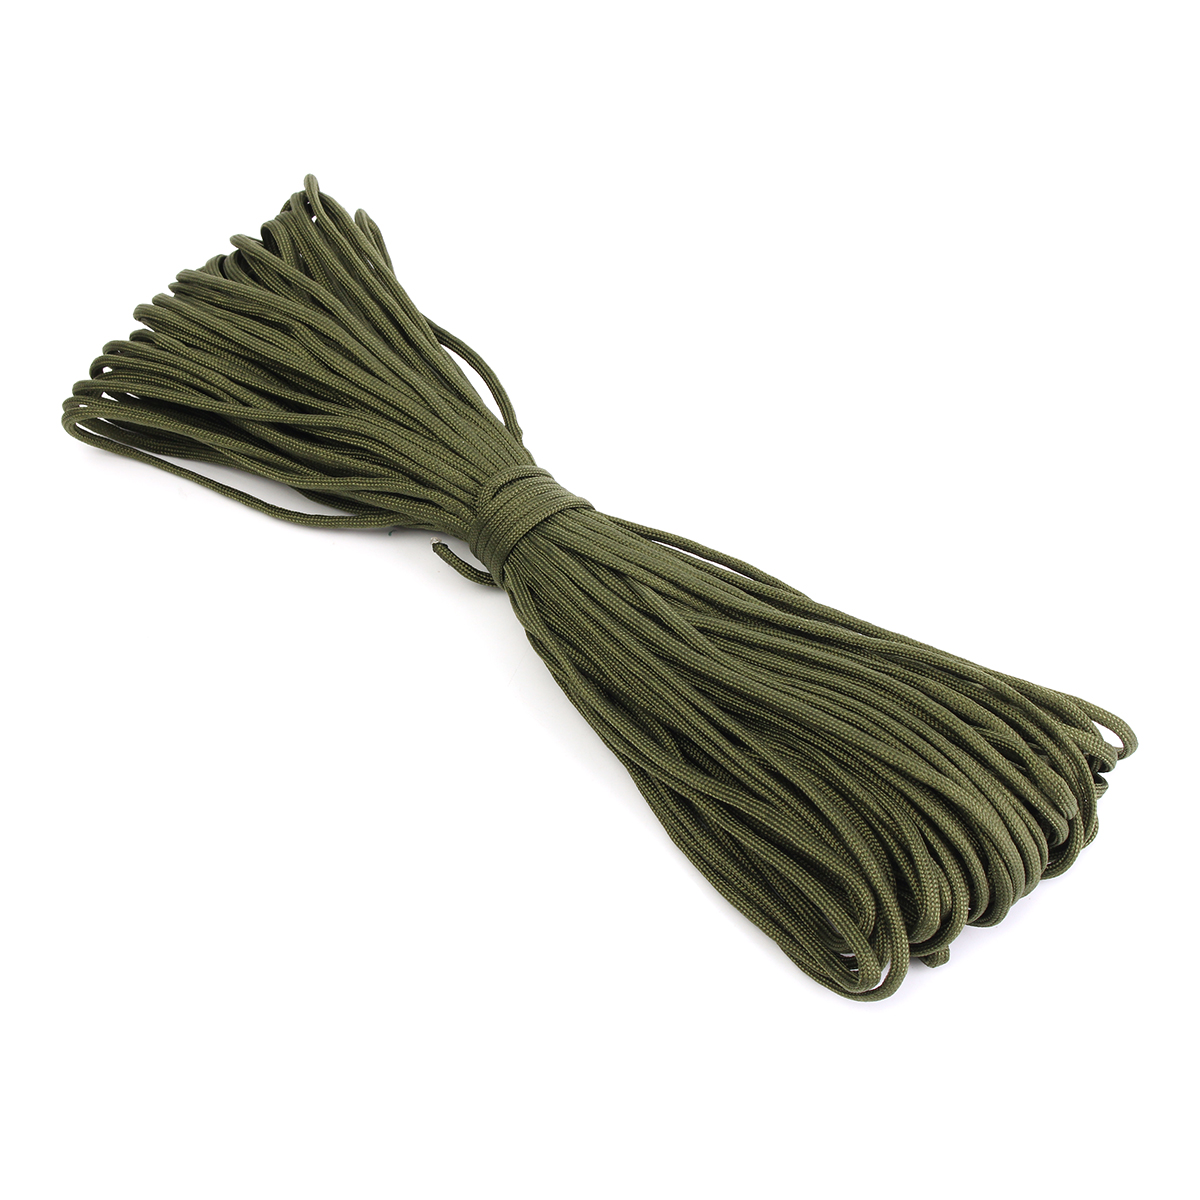 100FT30M-550lb-Paracord-Parachute-Lanyard-7-Strand-Core-Emergency-Army-Green-Rope-1222900-4